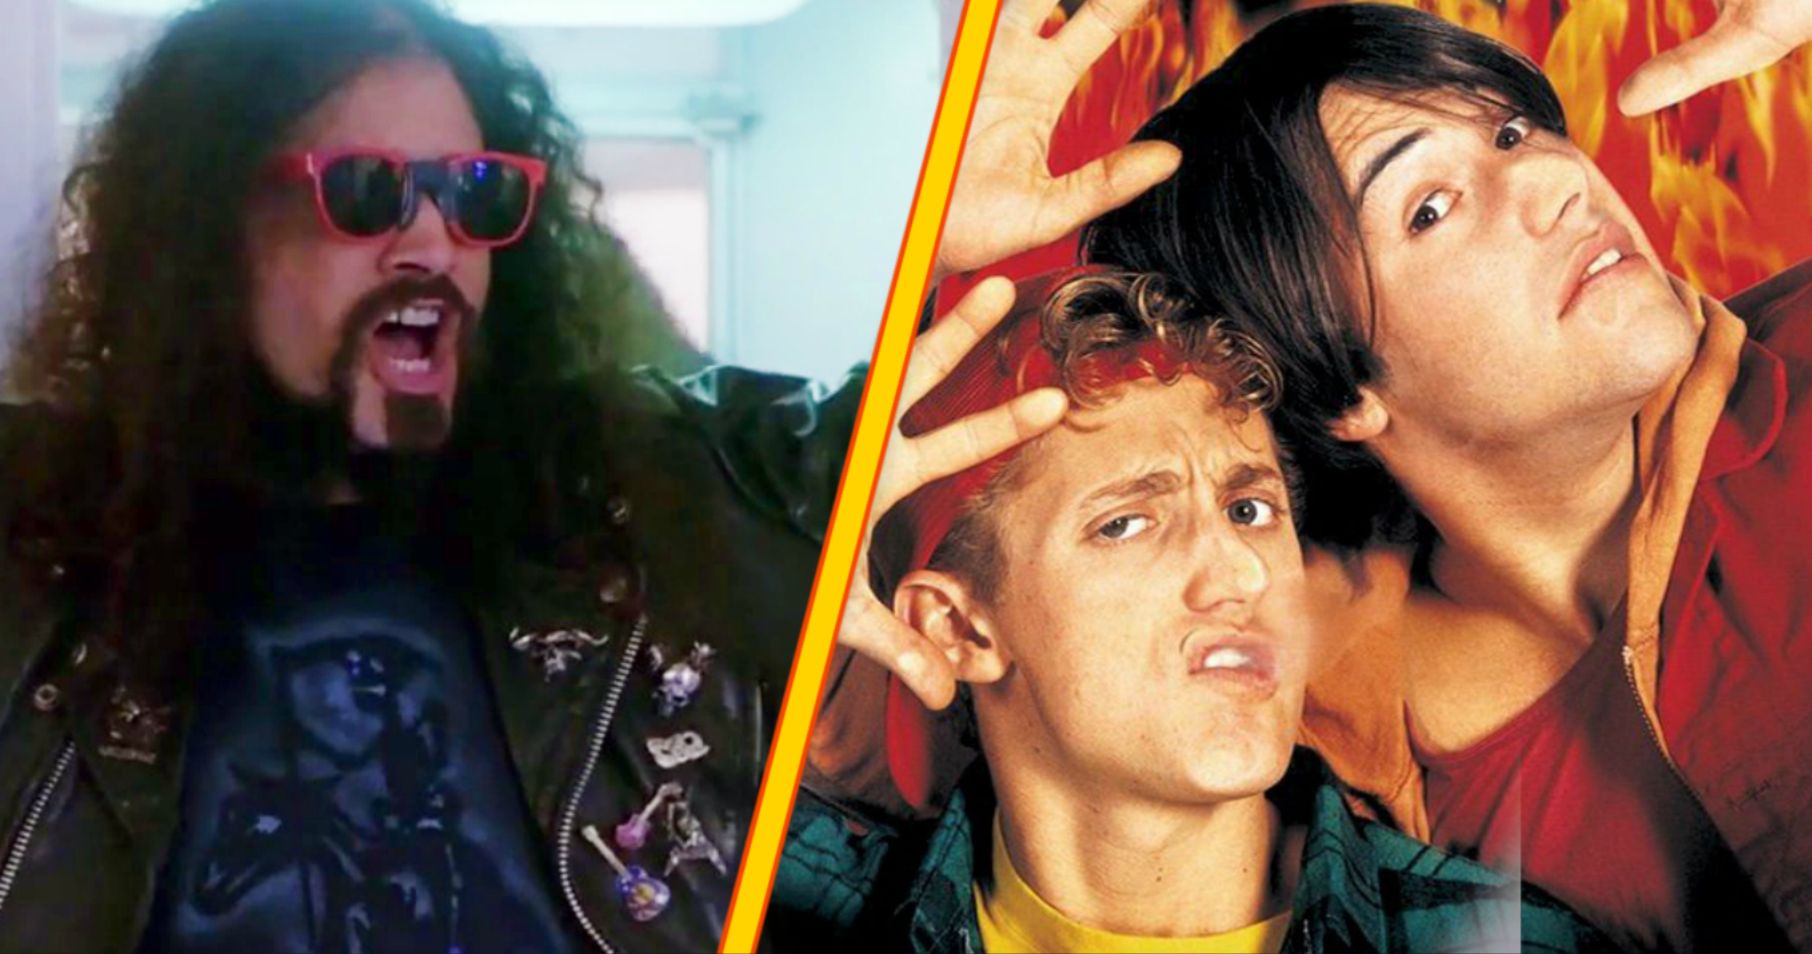 Wait, Does Bill &amp; Ted's Bogus Journey Take Place in an Alternate Timeline?